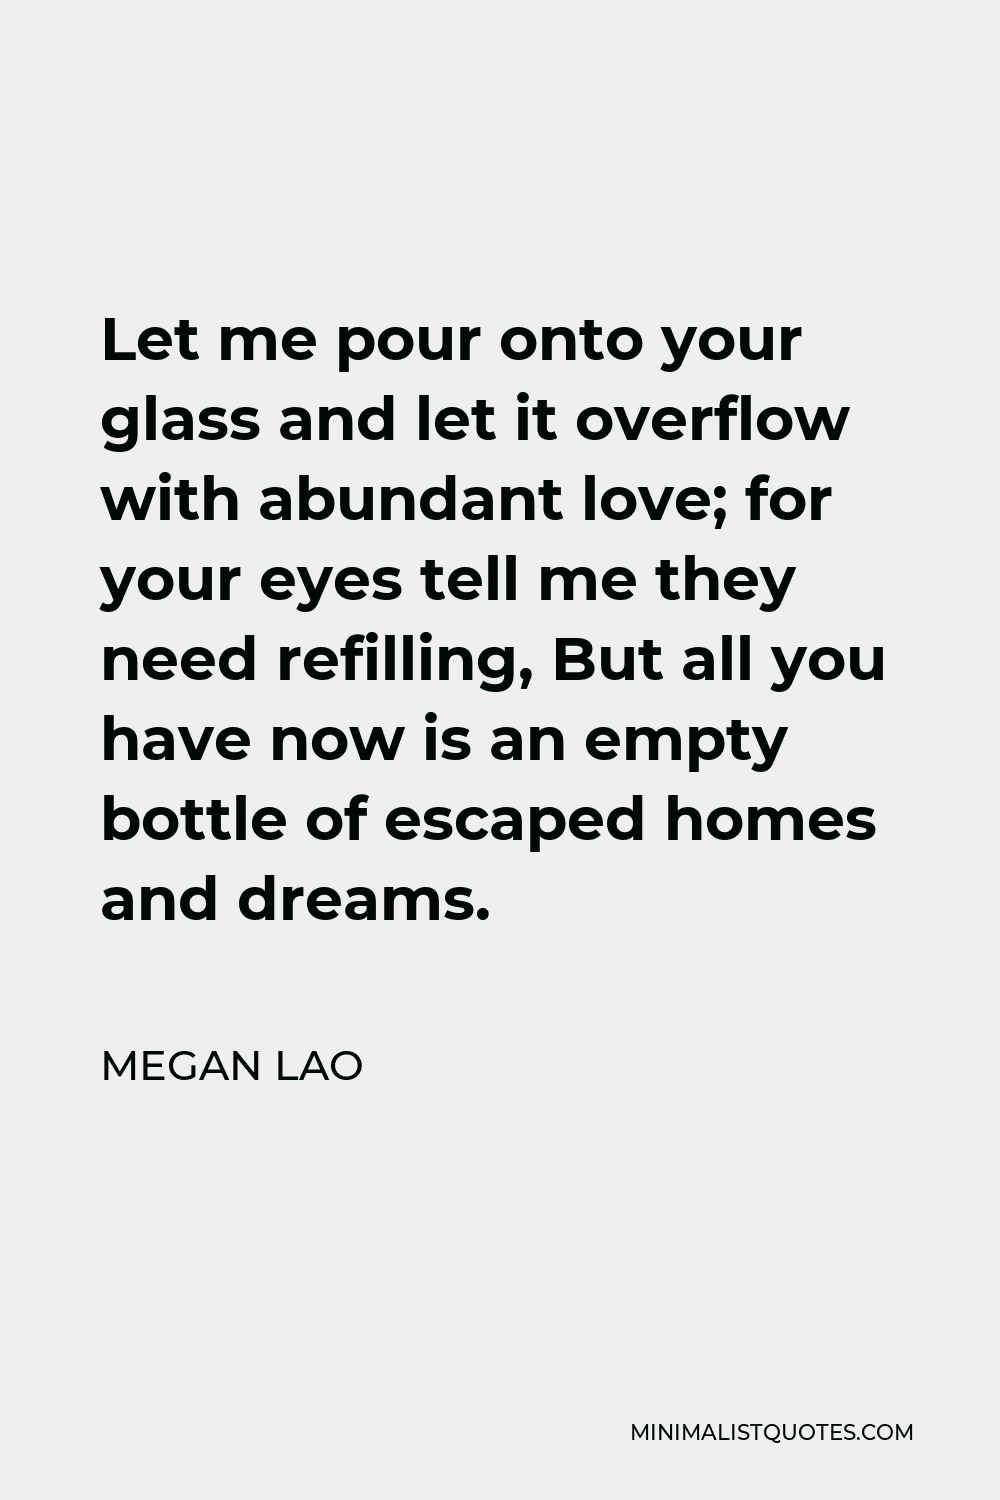 Megan Lao Quote - Let me pour onto your glass and let it overflow with abundant love; for your eyes tell me they need refilling, But all you have now is an empty bottle of escaped homes and dreams.